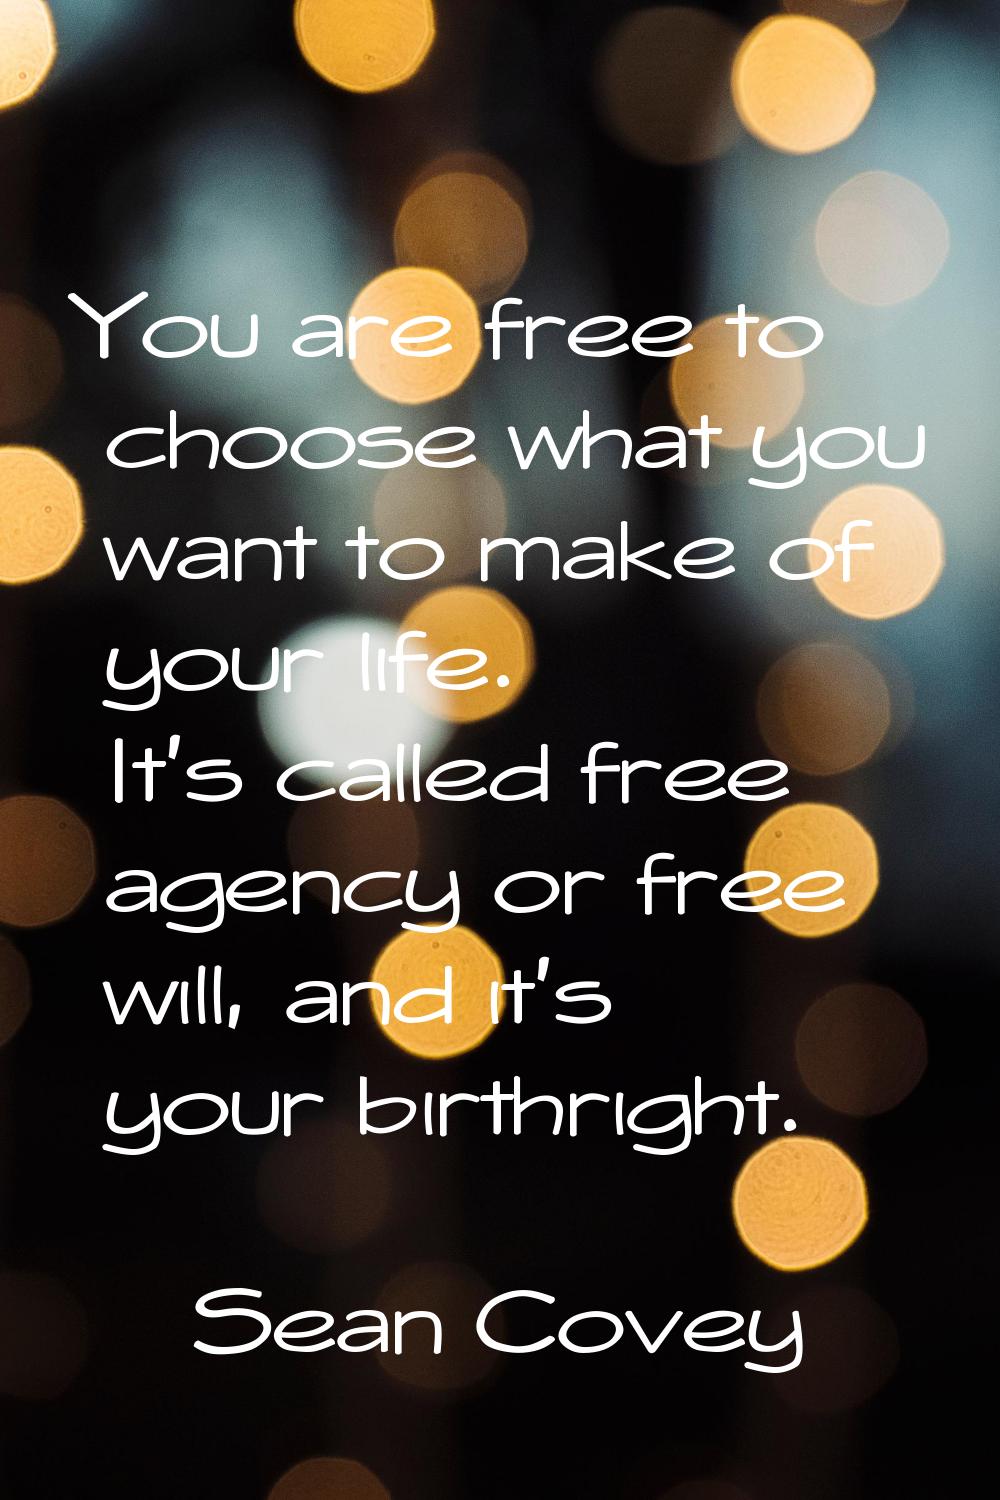 You are free to choose what you want to make of your life. It's called free agency or free will, an